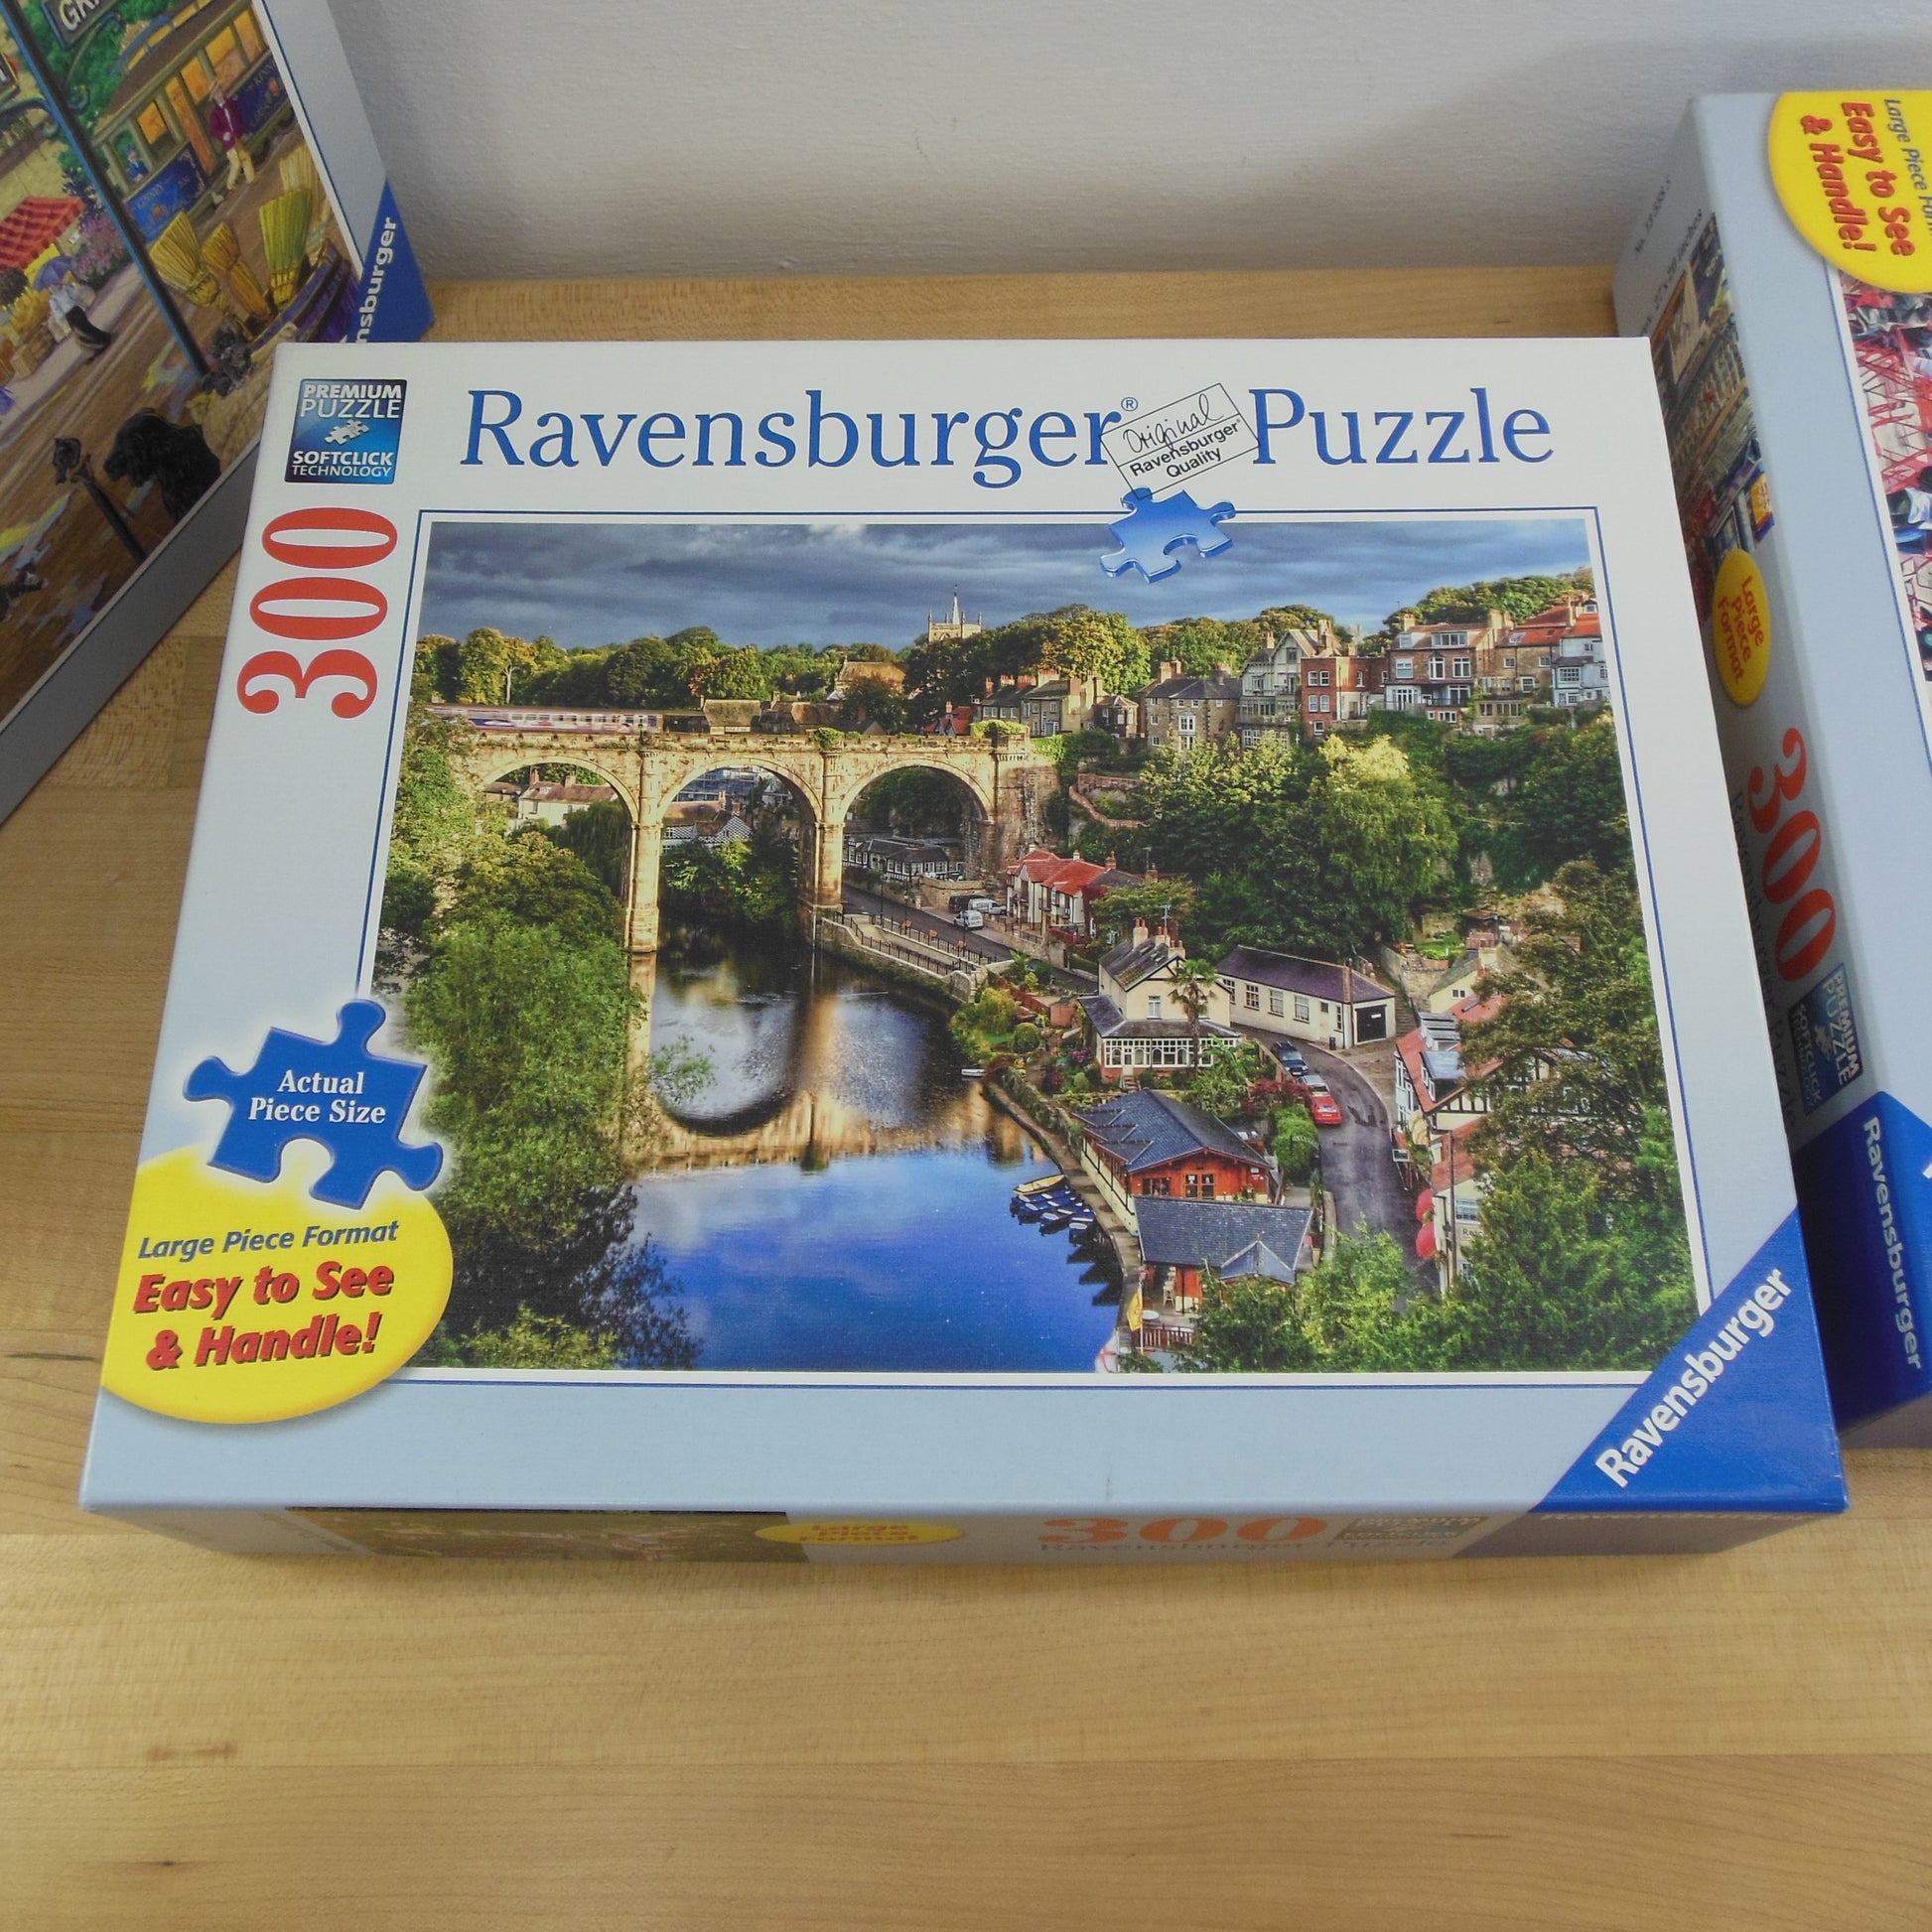 Ravensburger Puzzle 3 Lot 300 Large Pieces Mary's General Store Times Square Over The River Used